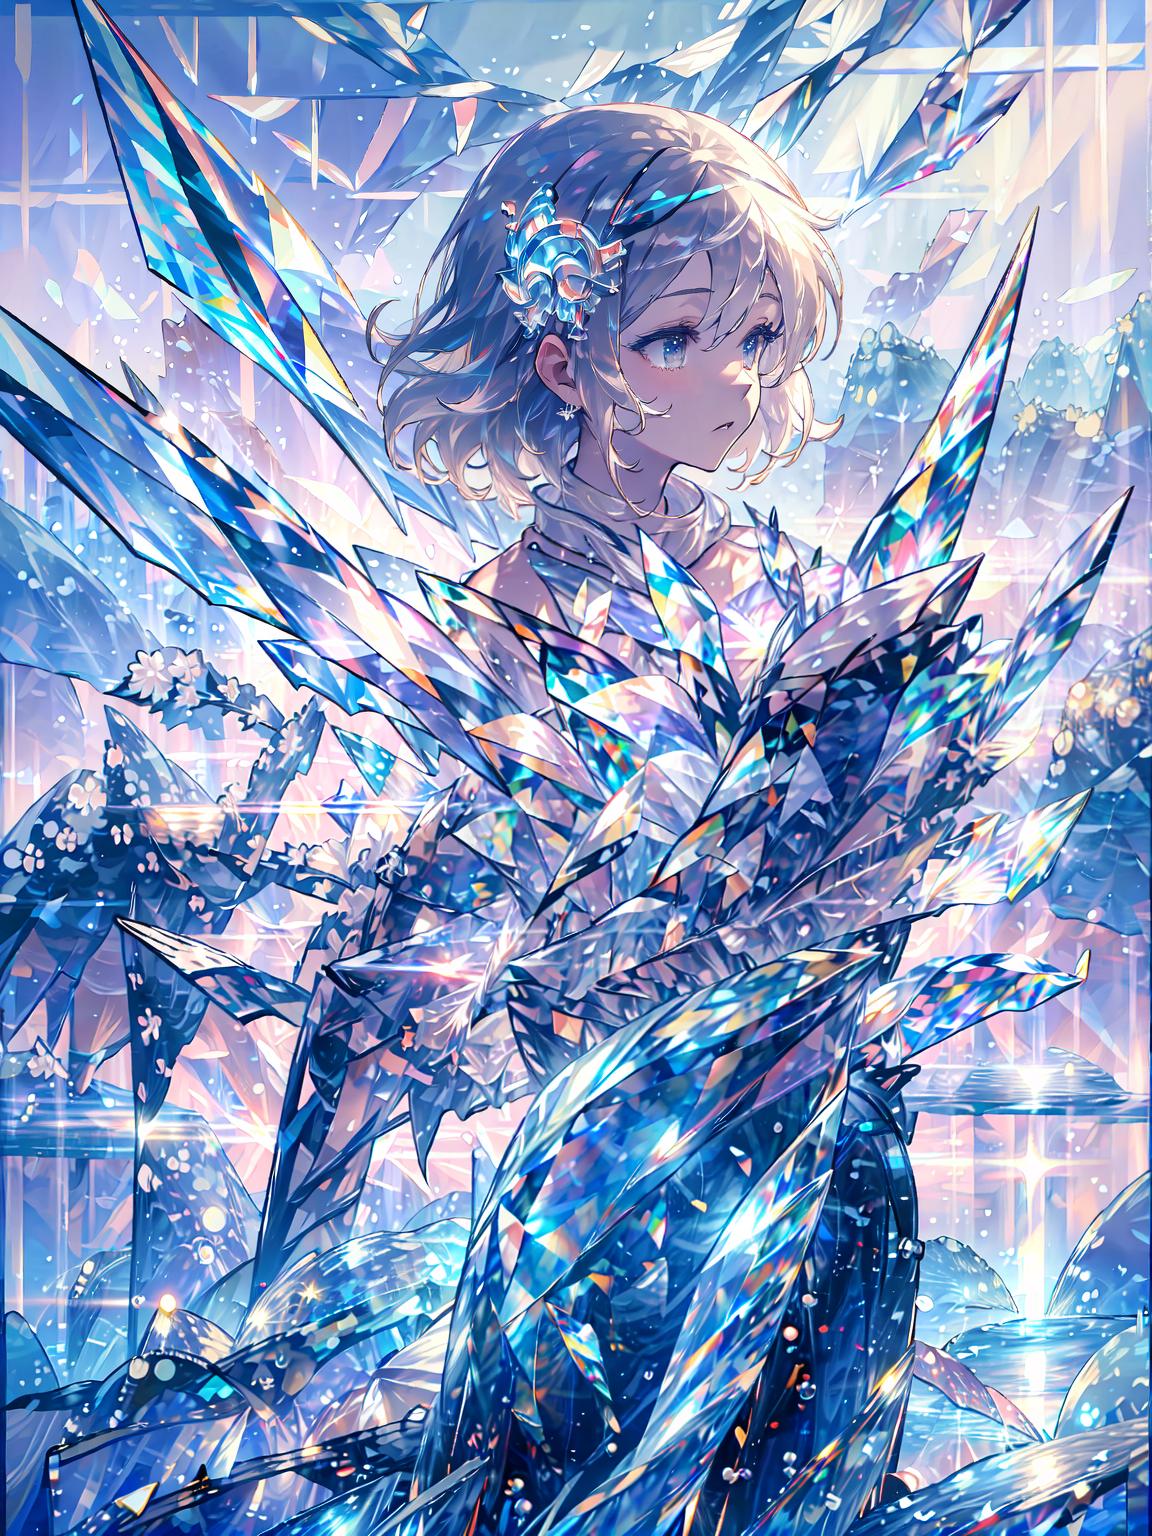  master piece, best quality, ultra detailed, highres, 4k.8k, Godlike Being, Observing, creating, blessing, Serene, BREAK Divine Creator with Unfathomable Form, Celestial Realm, Book of Knowledge, Celestial Light, World Globe, Angelic Figures, BREAK Majestic and Peaceful, Radiant glow, divine presence, ethereal aura, celestial harmony, crystallineAI